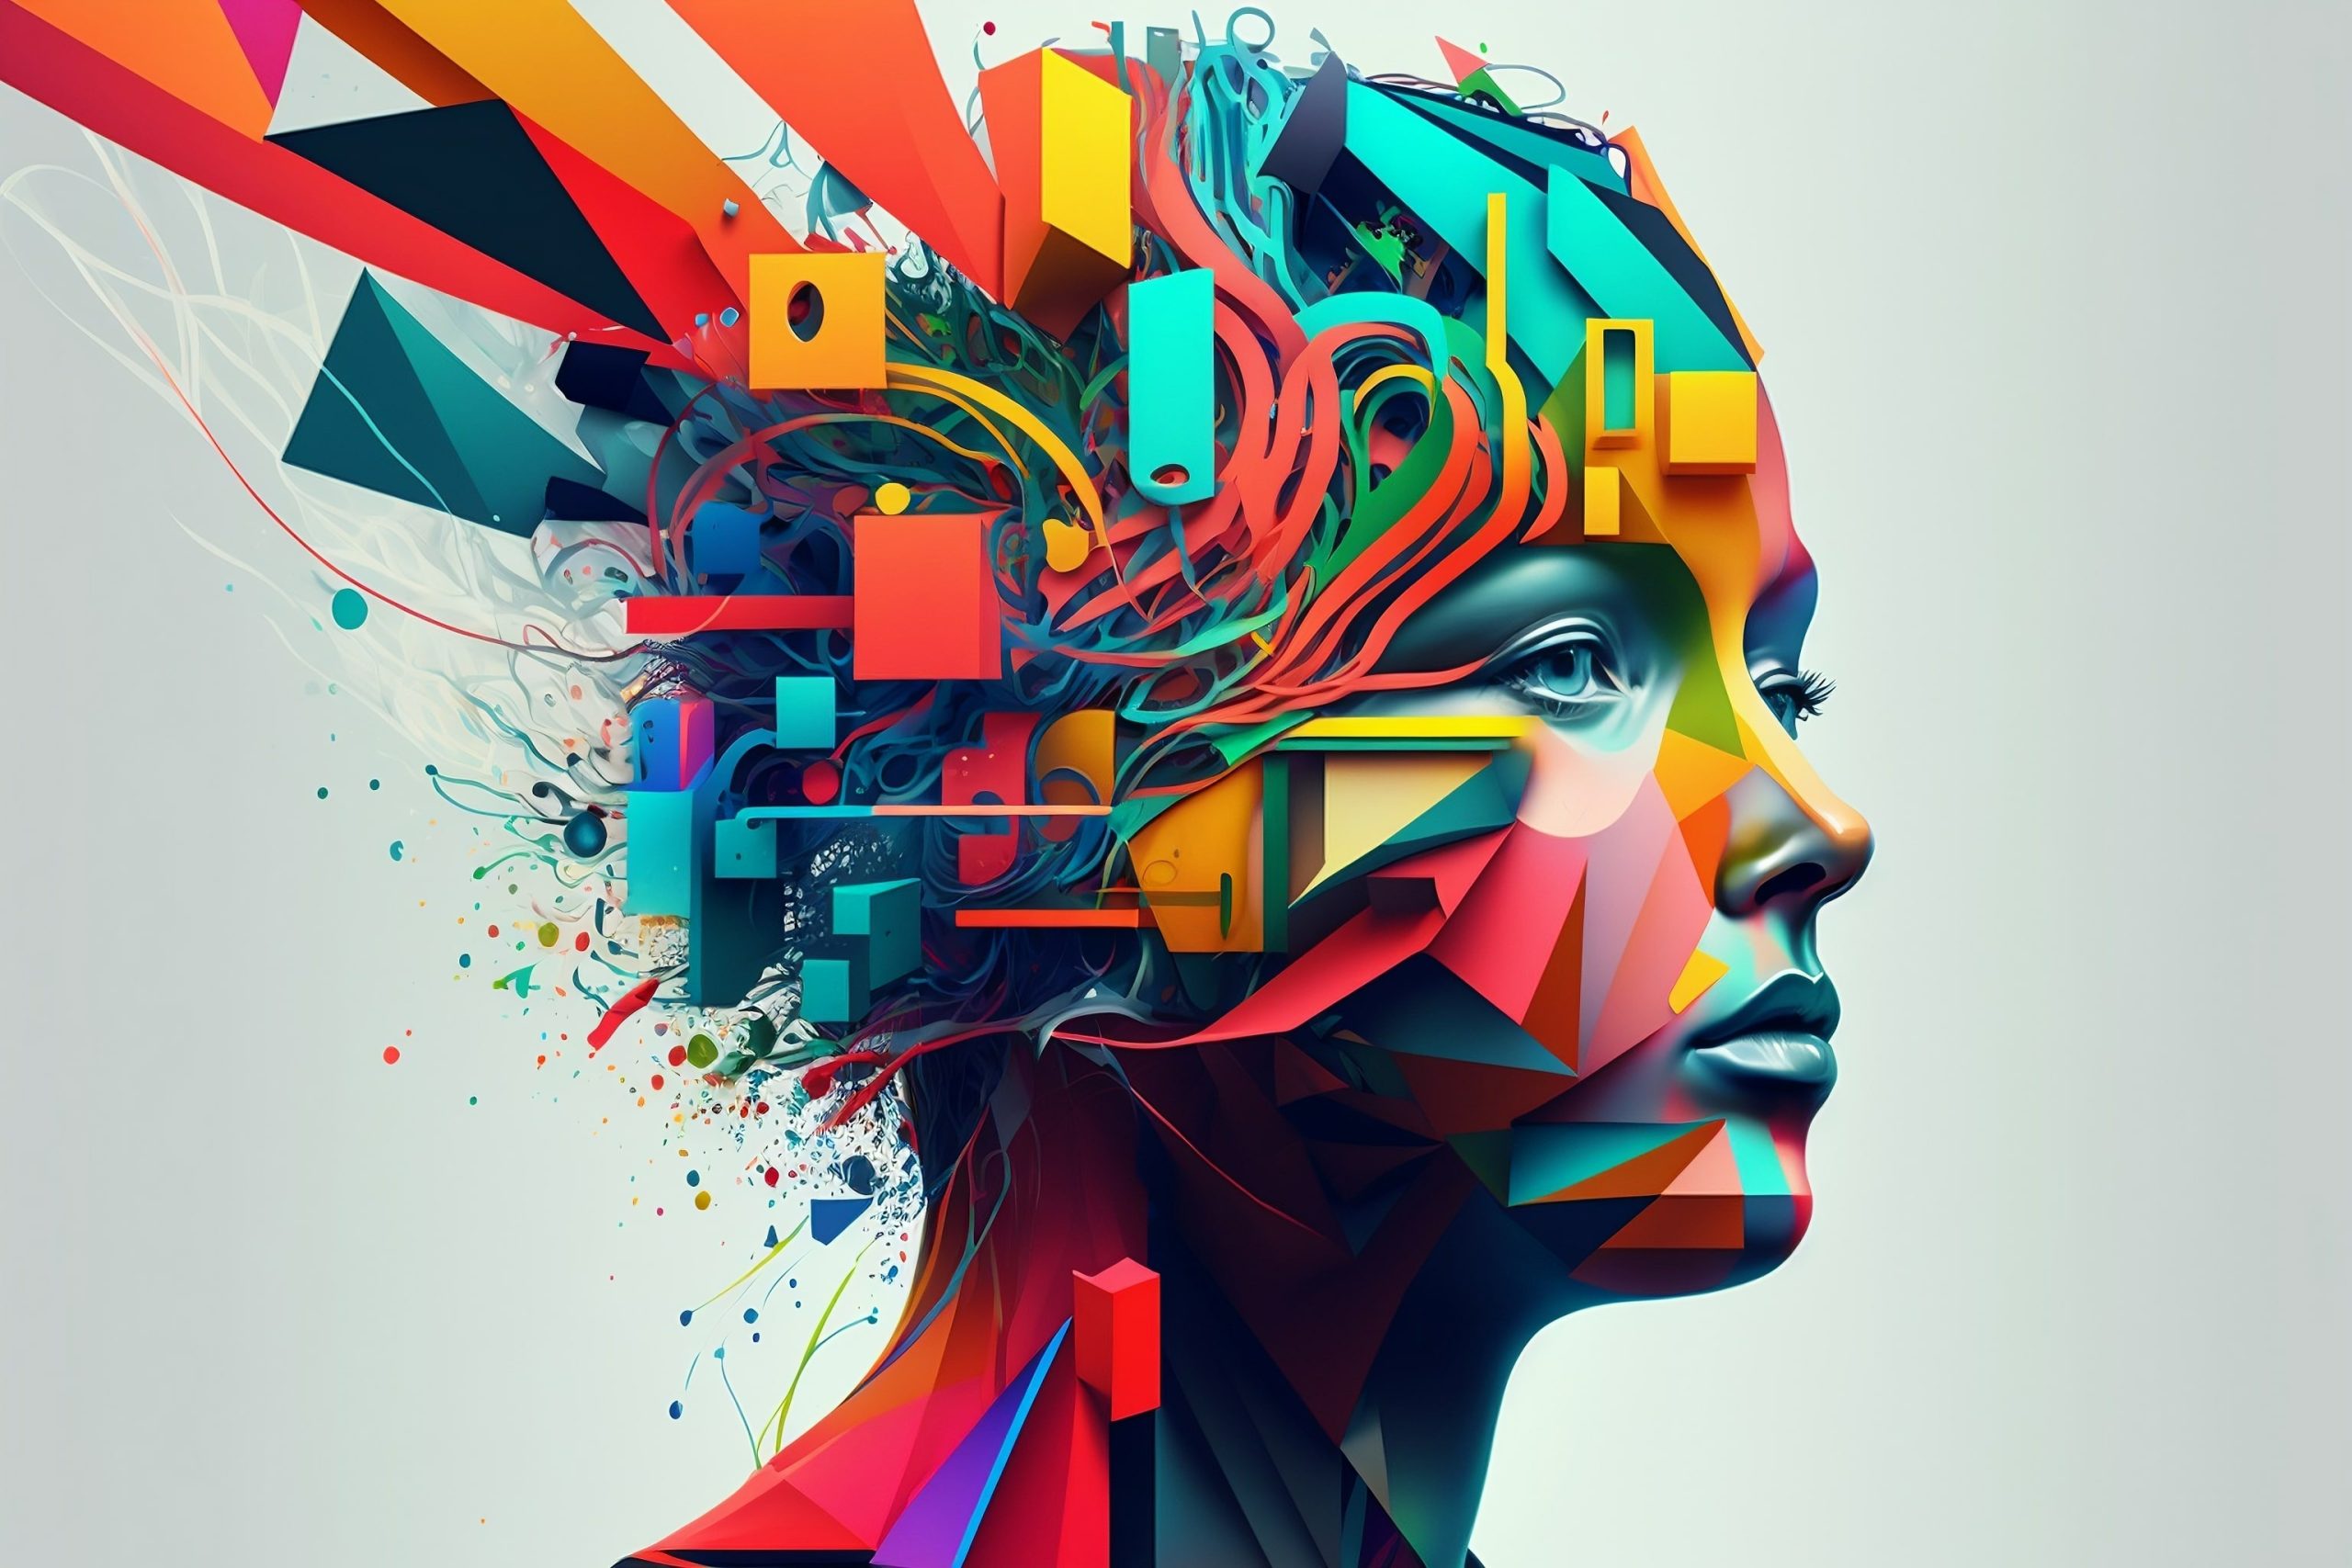 Colorful 3D collage illustration representing a person with a creative mind